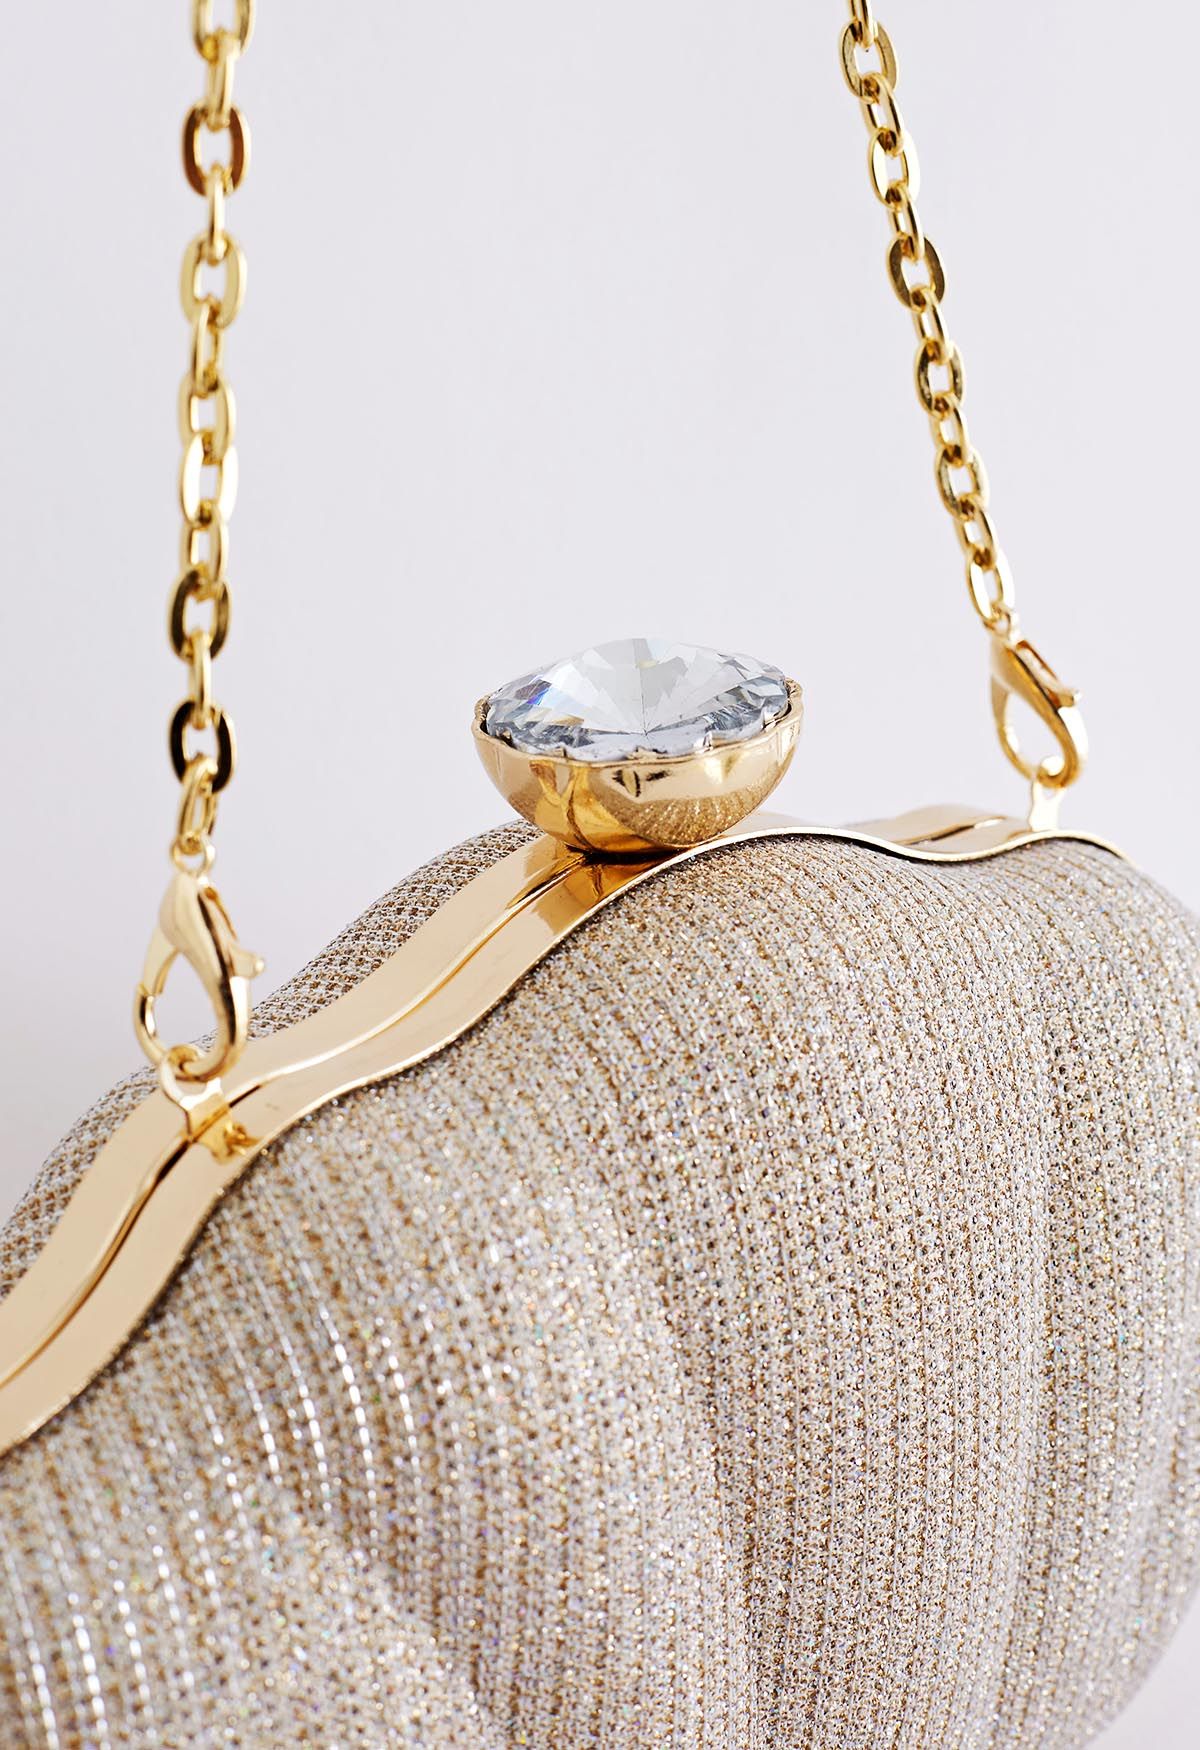 Sparkling Seashell Shape Clutch in Gold